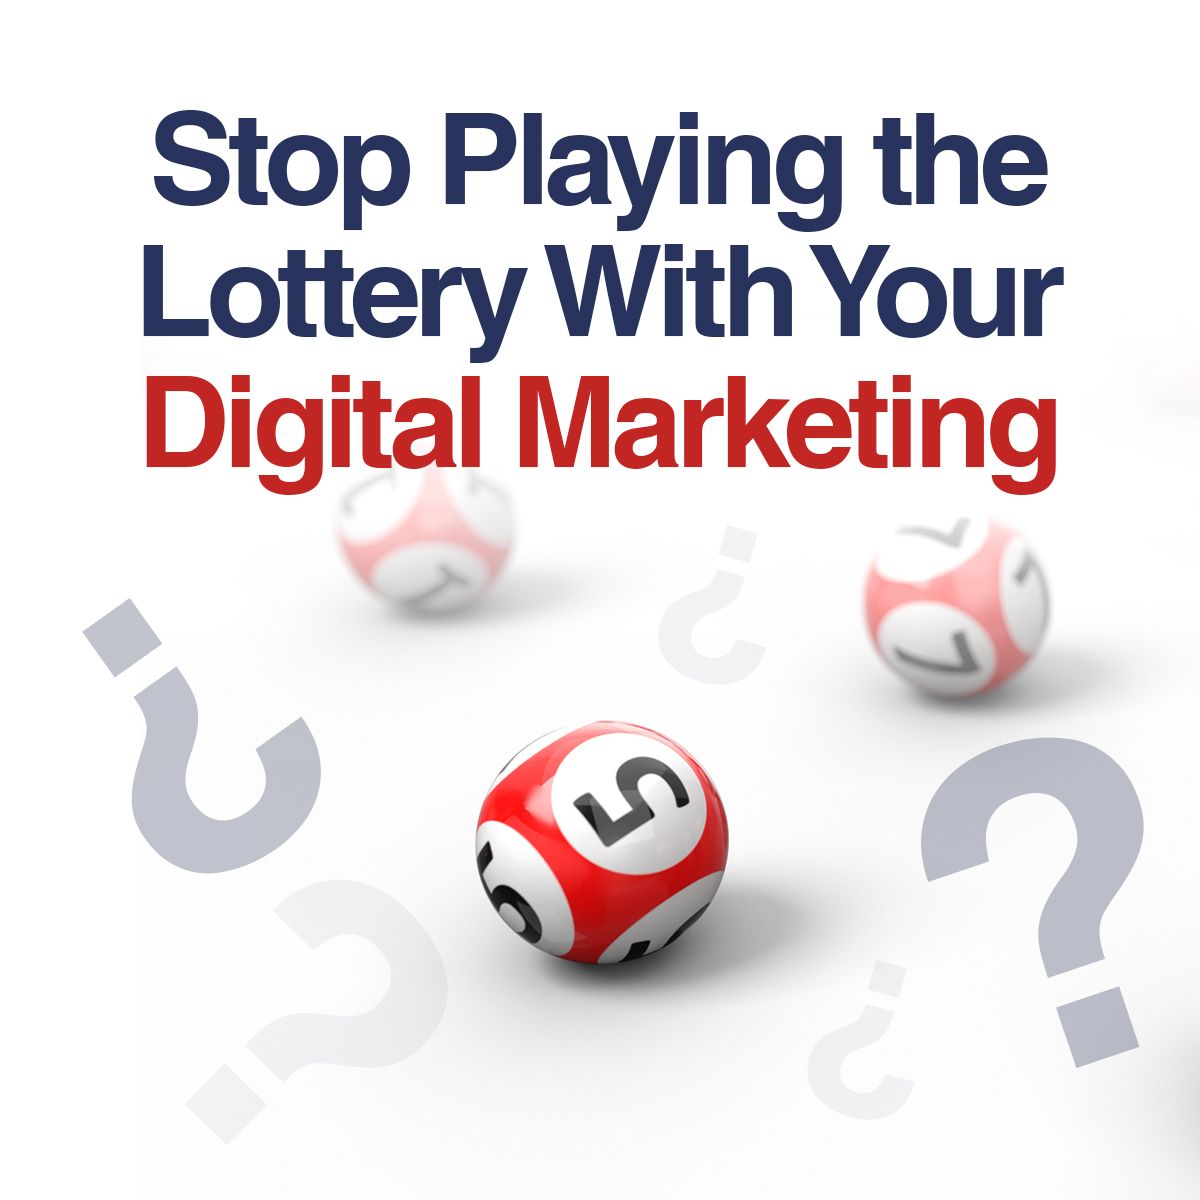 Stop Playing the Lottery With Your Digital Marketing